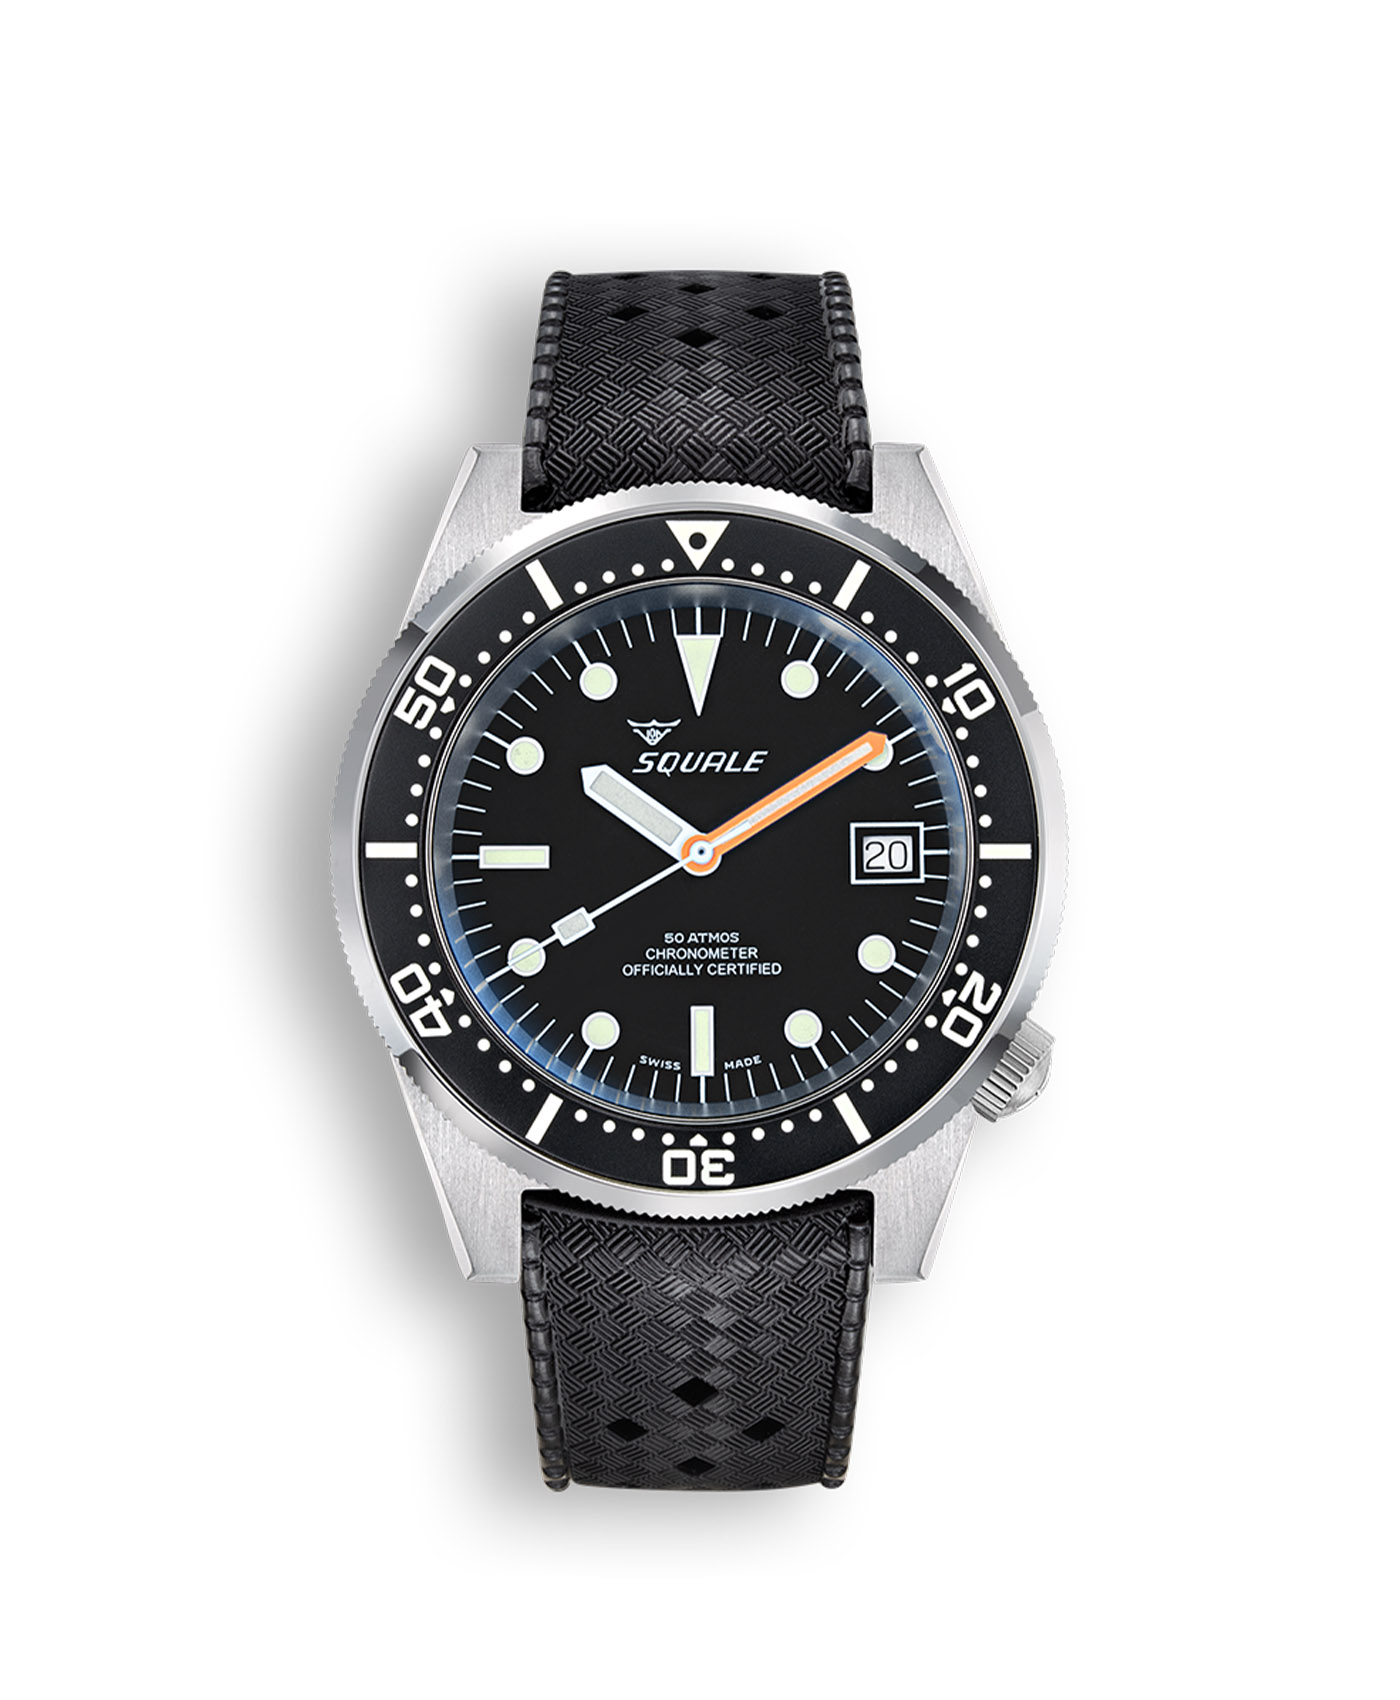 Squale - 1521 Classic COSC - 1521COSCL